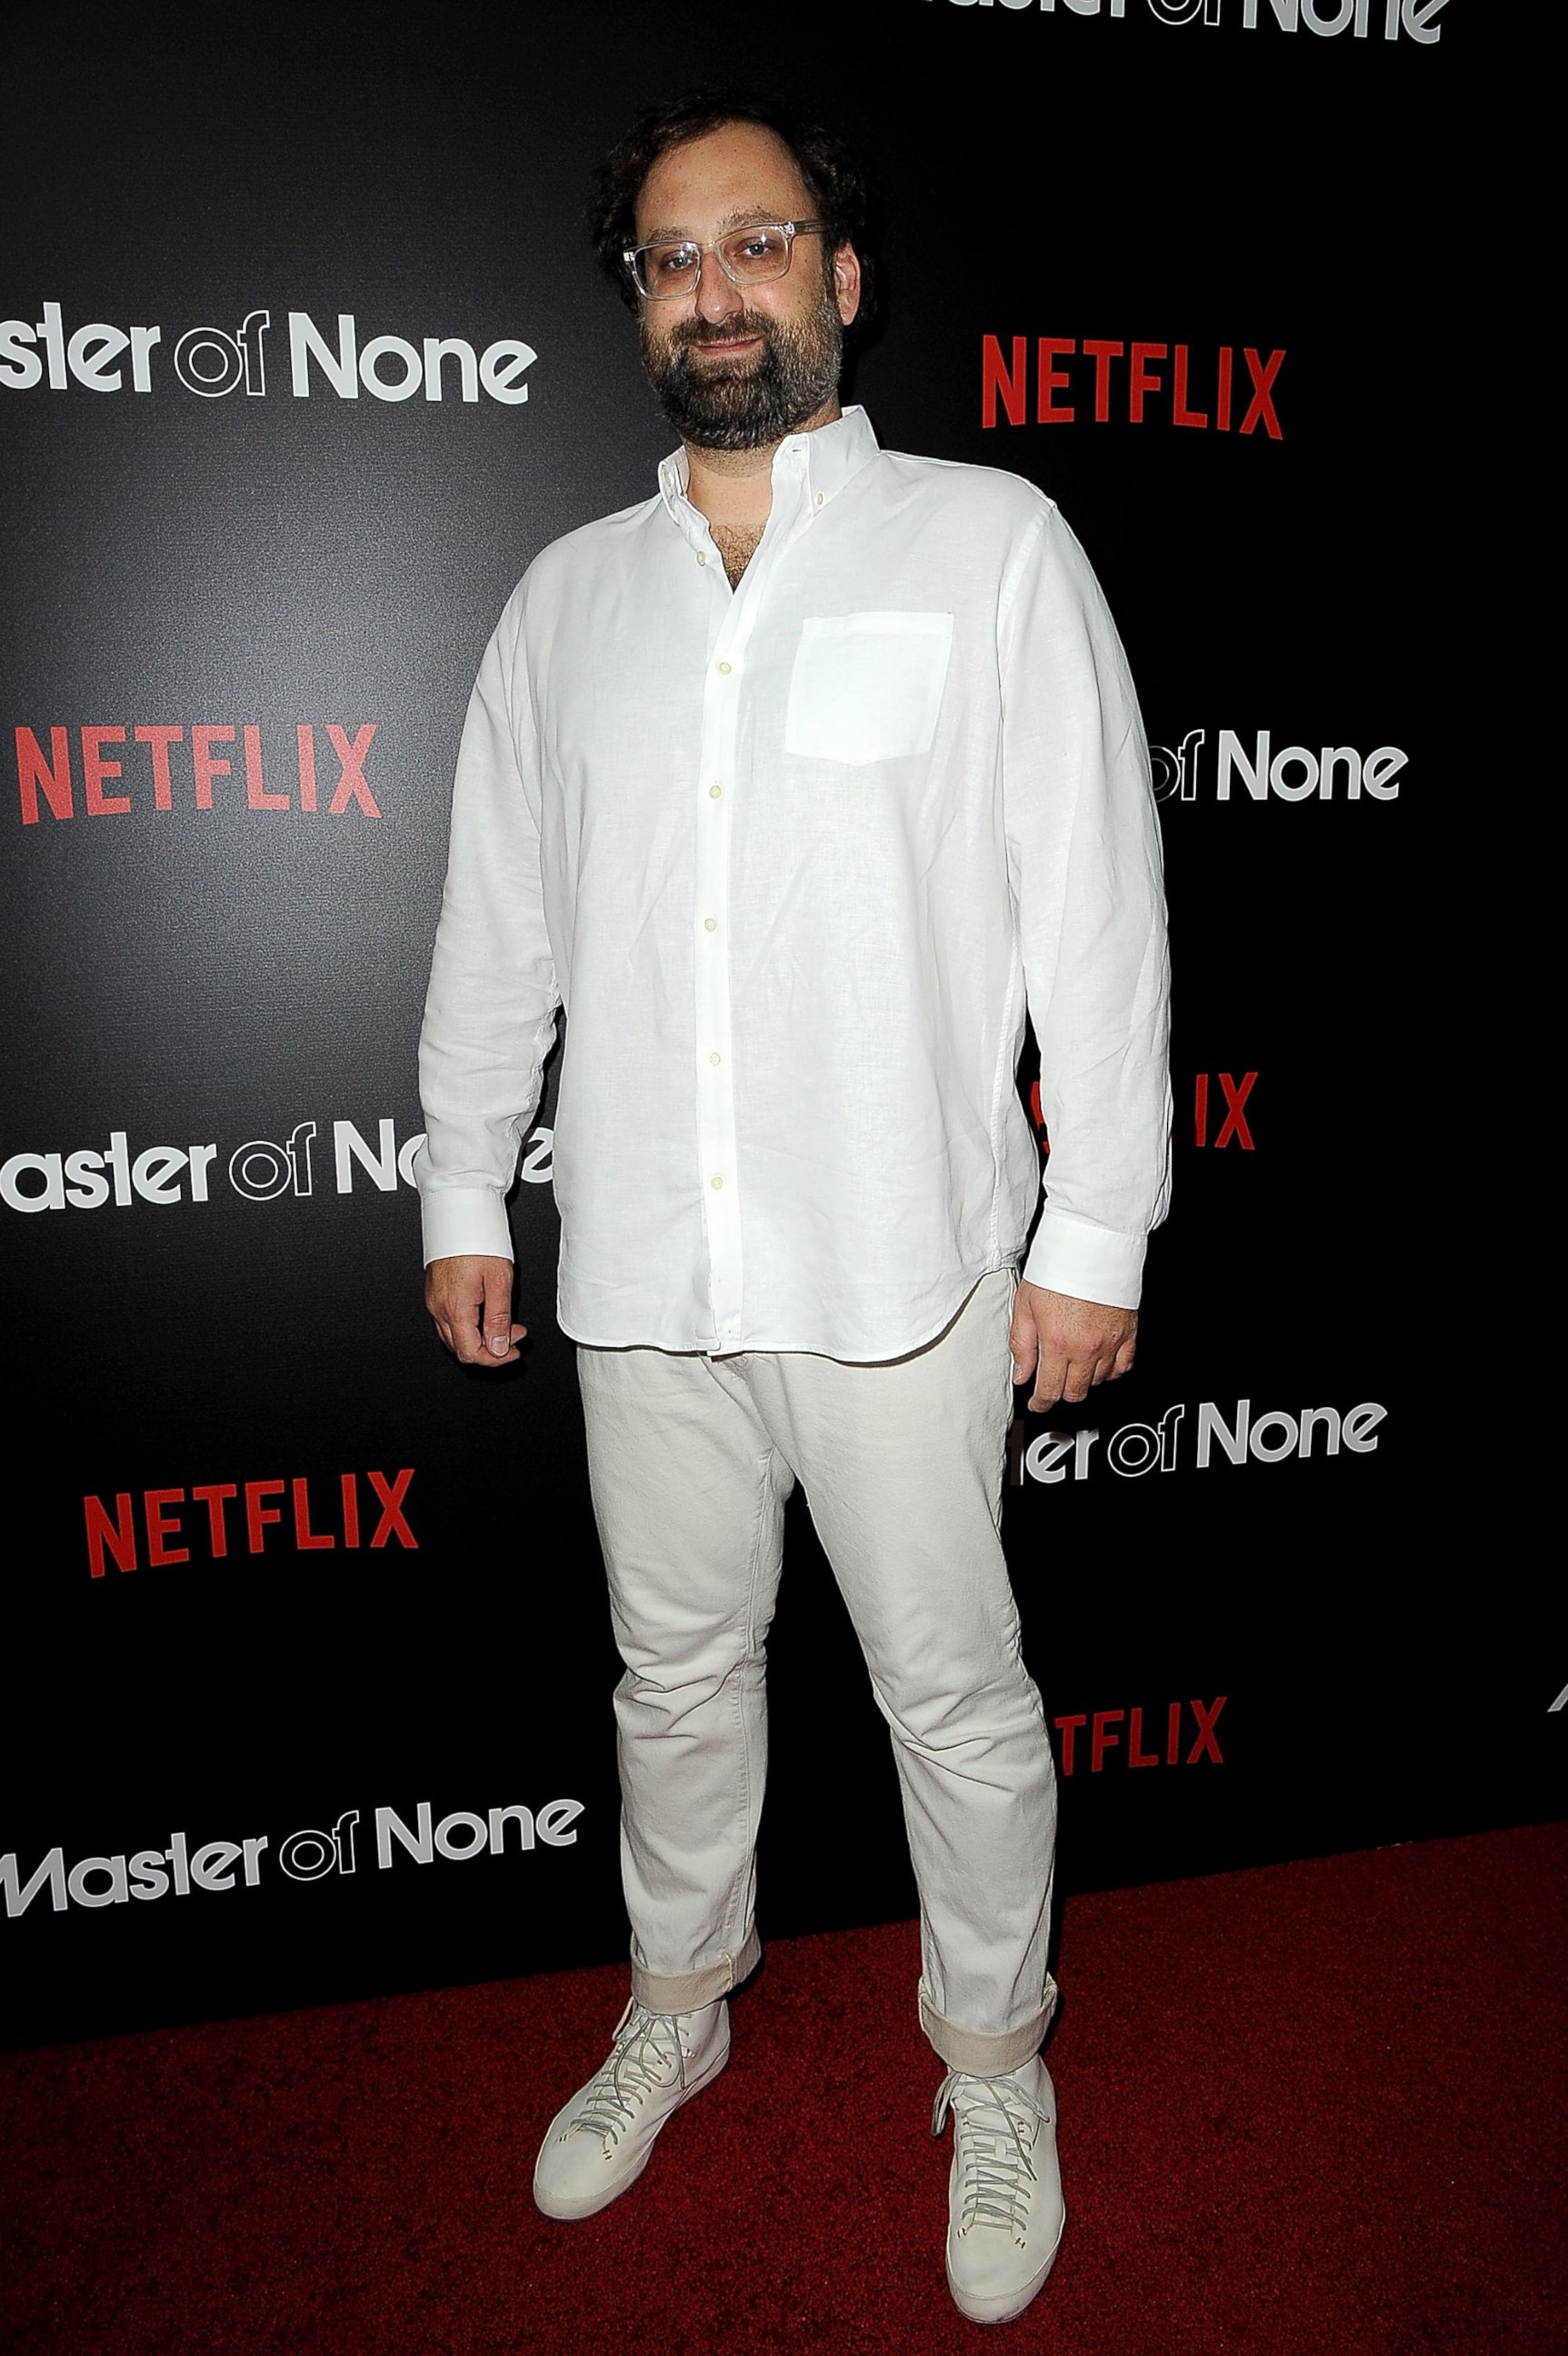 PHOTO: Eric Wareheim attends "Master Of None" premiere on Nov, 5, 2015 in New York.  